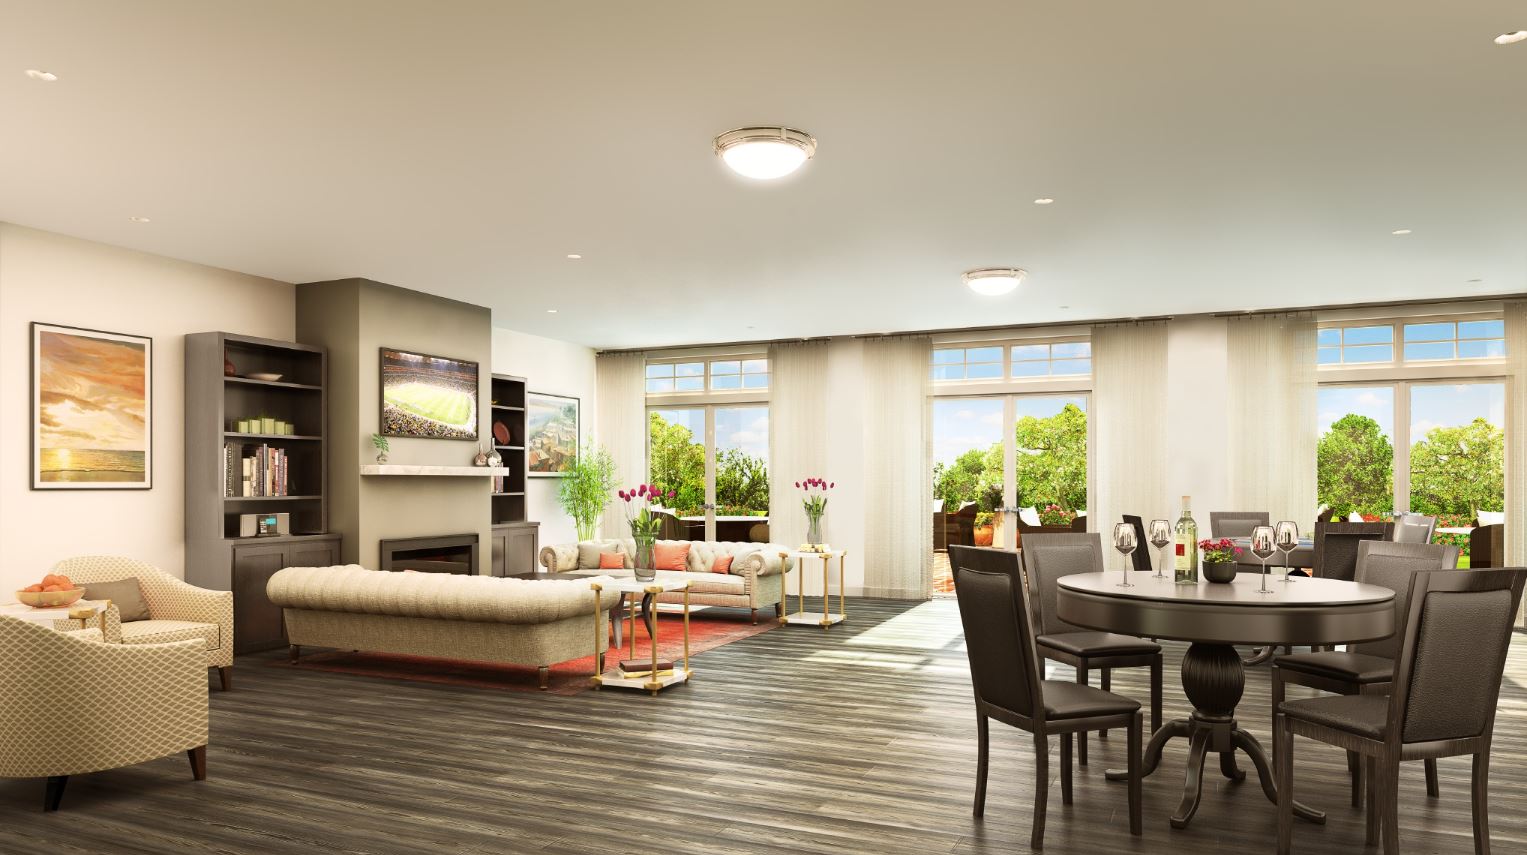 Two-bedroom residences at The Preserve average 1,350 square feet and are as large as 1,640 square feet, far larger than all other apartments in the area. The units feature open concept floor plans.